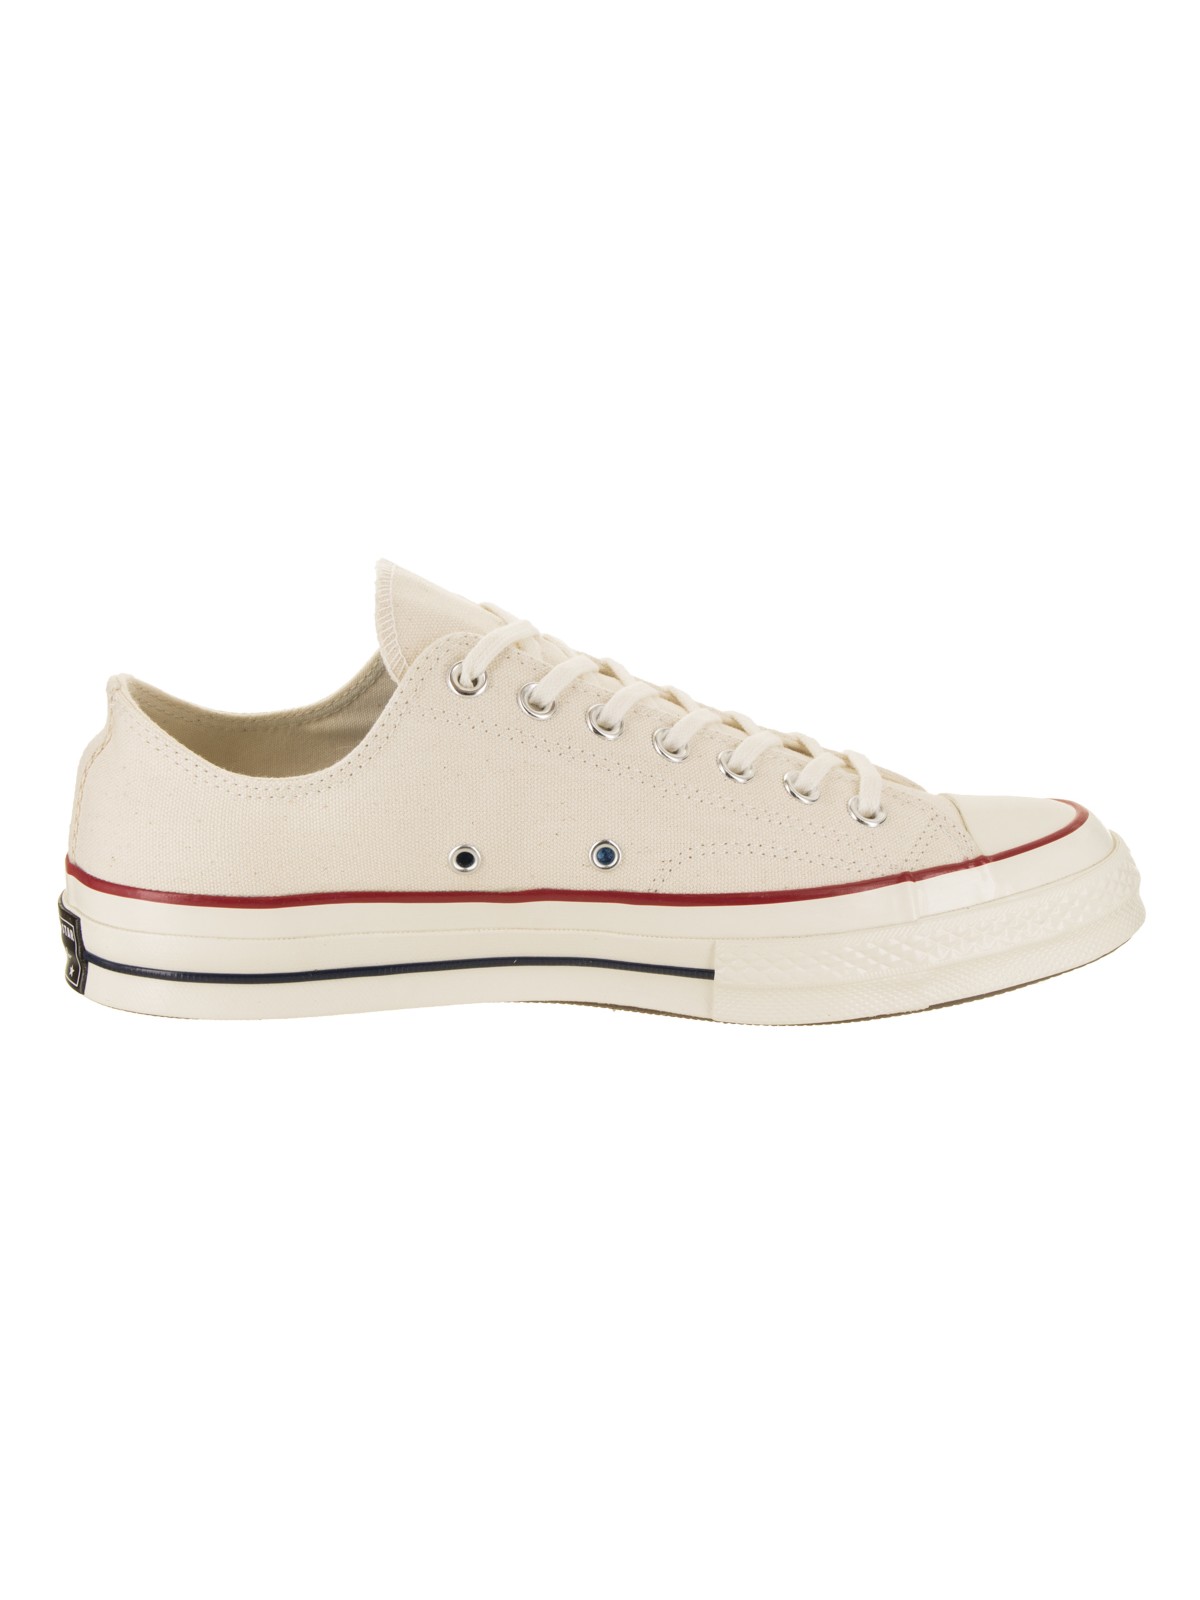 Converse Unisex Chuck Taylor All Star 70 Ox Basketball Shoe - image 2 of 5